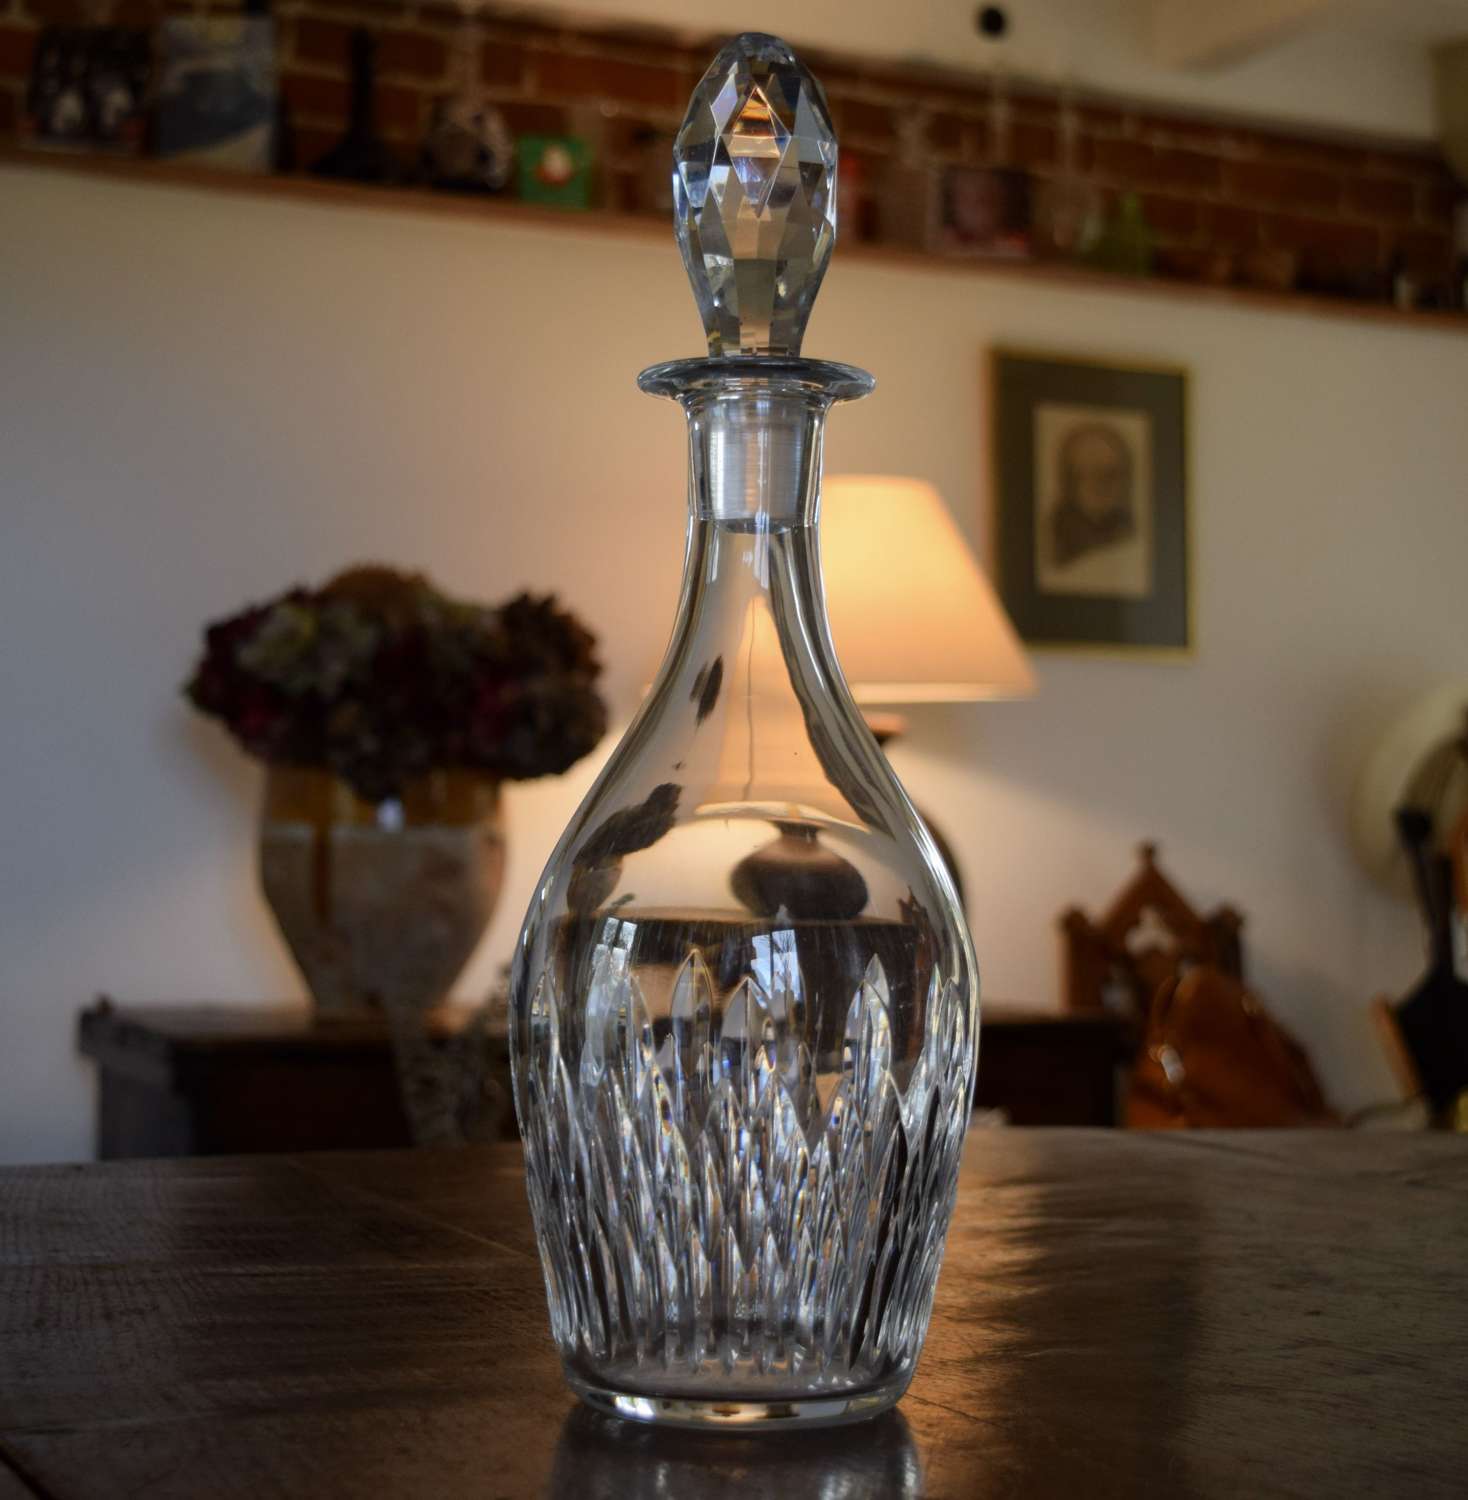 Tiffany & Co Decanter by Baccarat